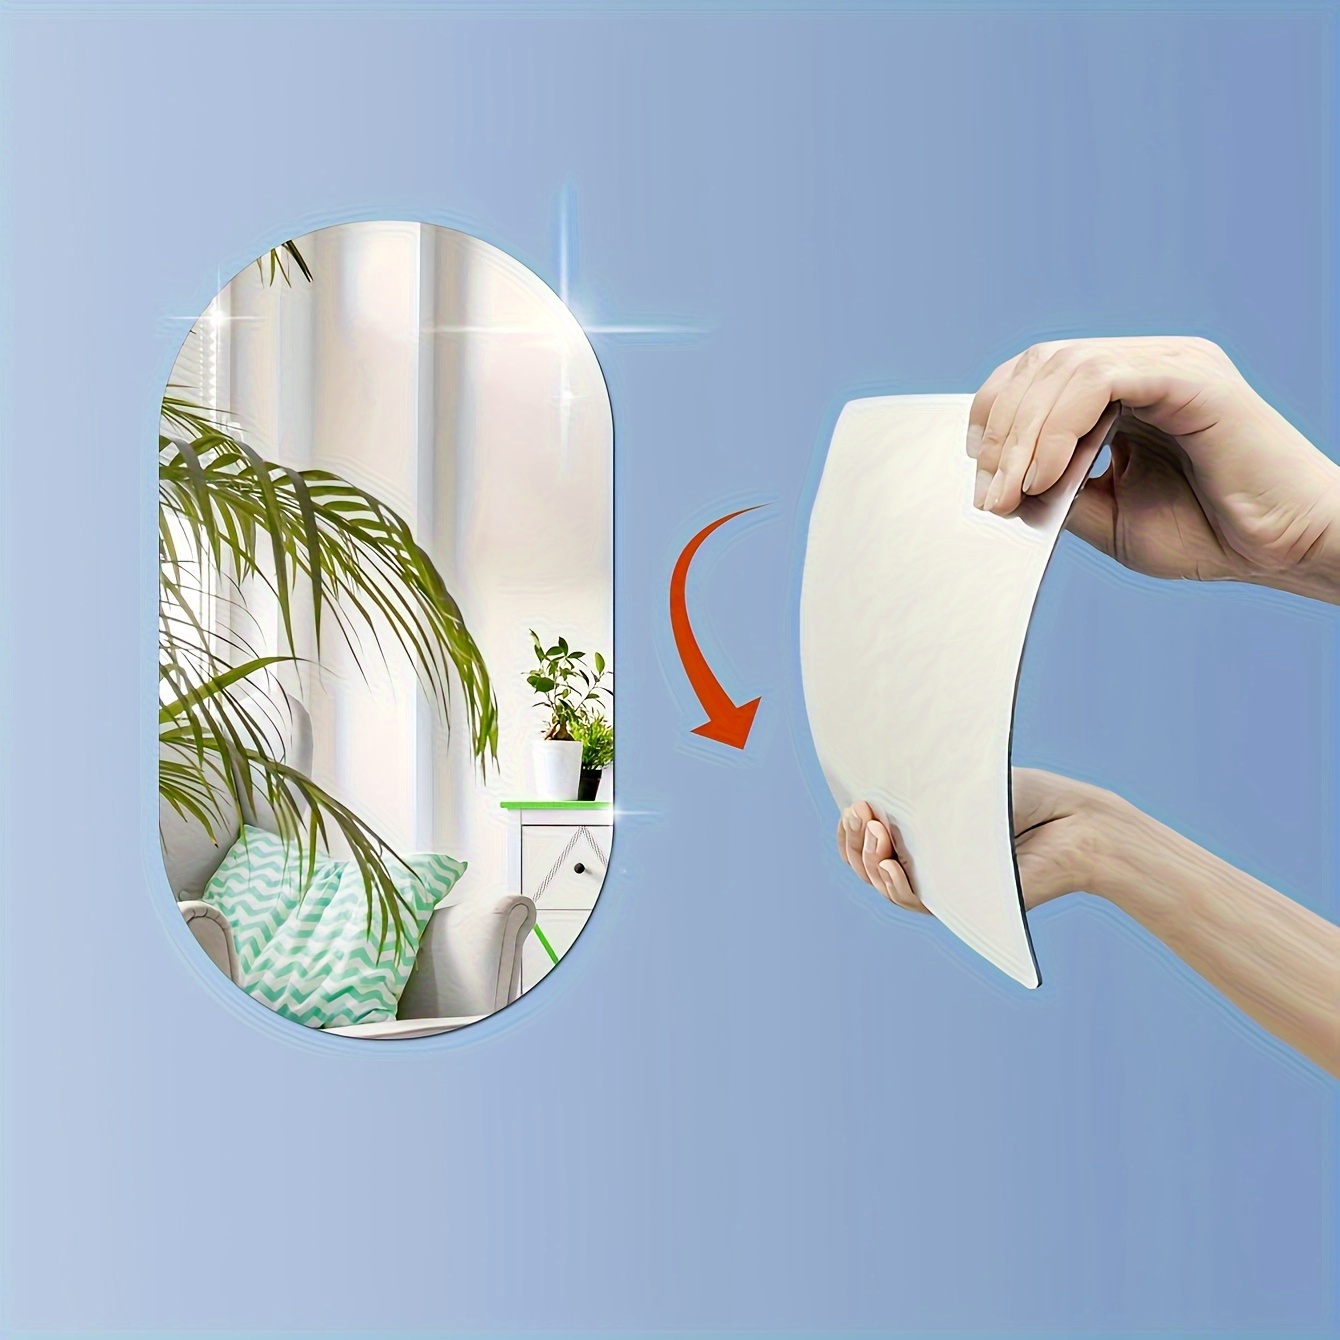 Flexible Mirror Sheets,mirror Paper Self Adhesive Roll Stickers Non Glass  Self Adhesive Mirror Tiles